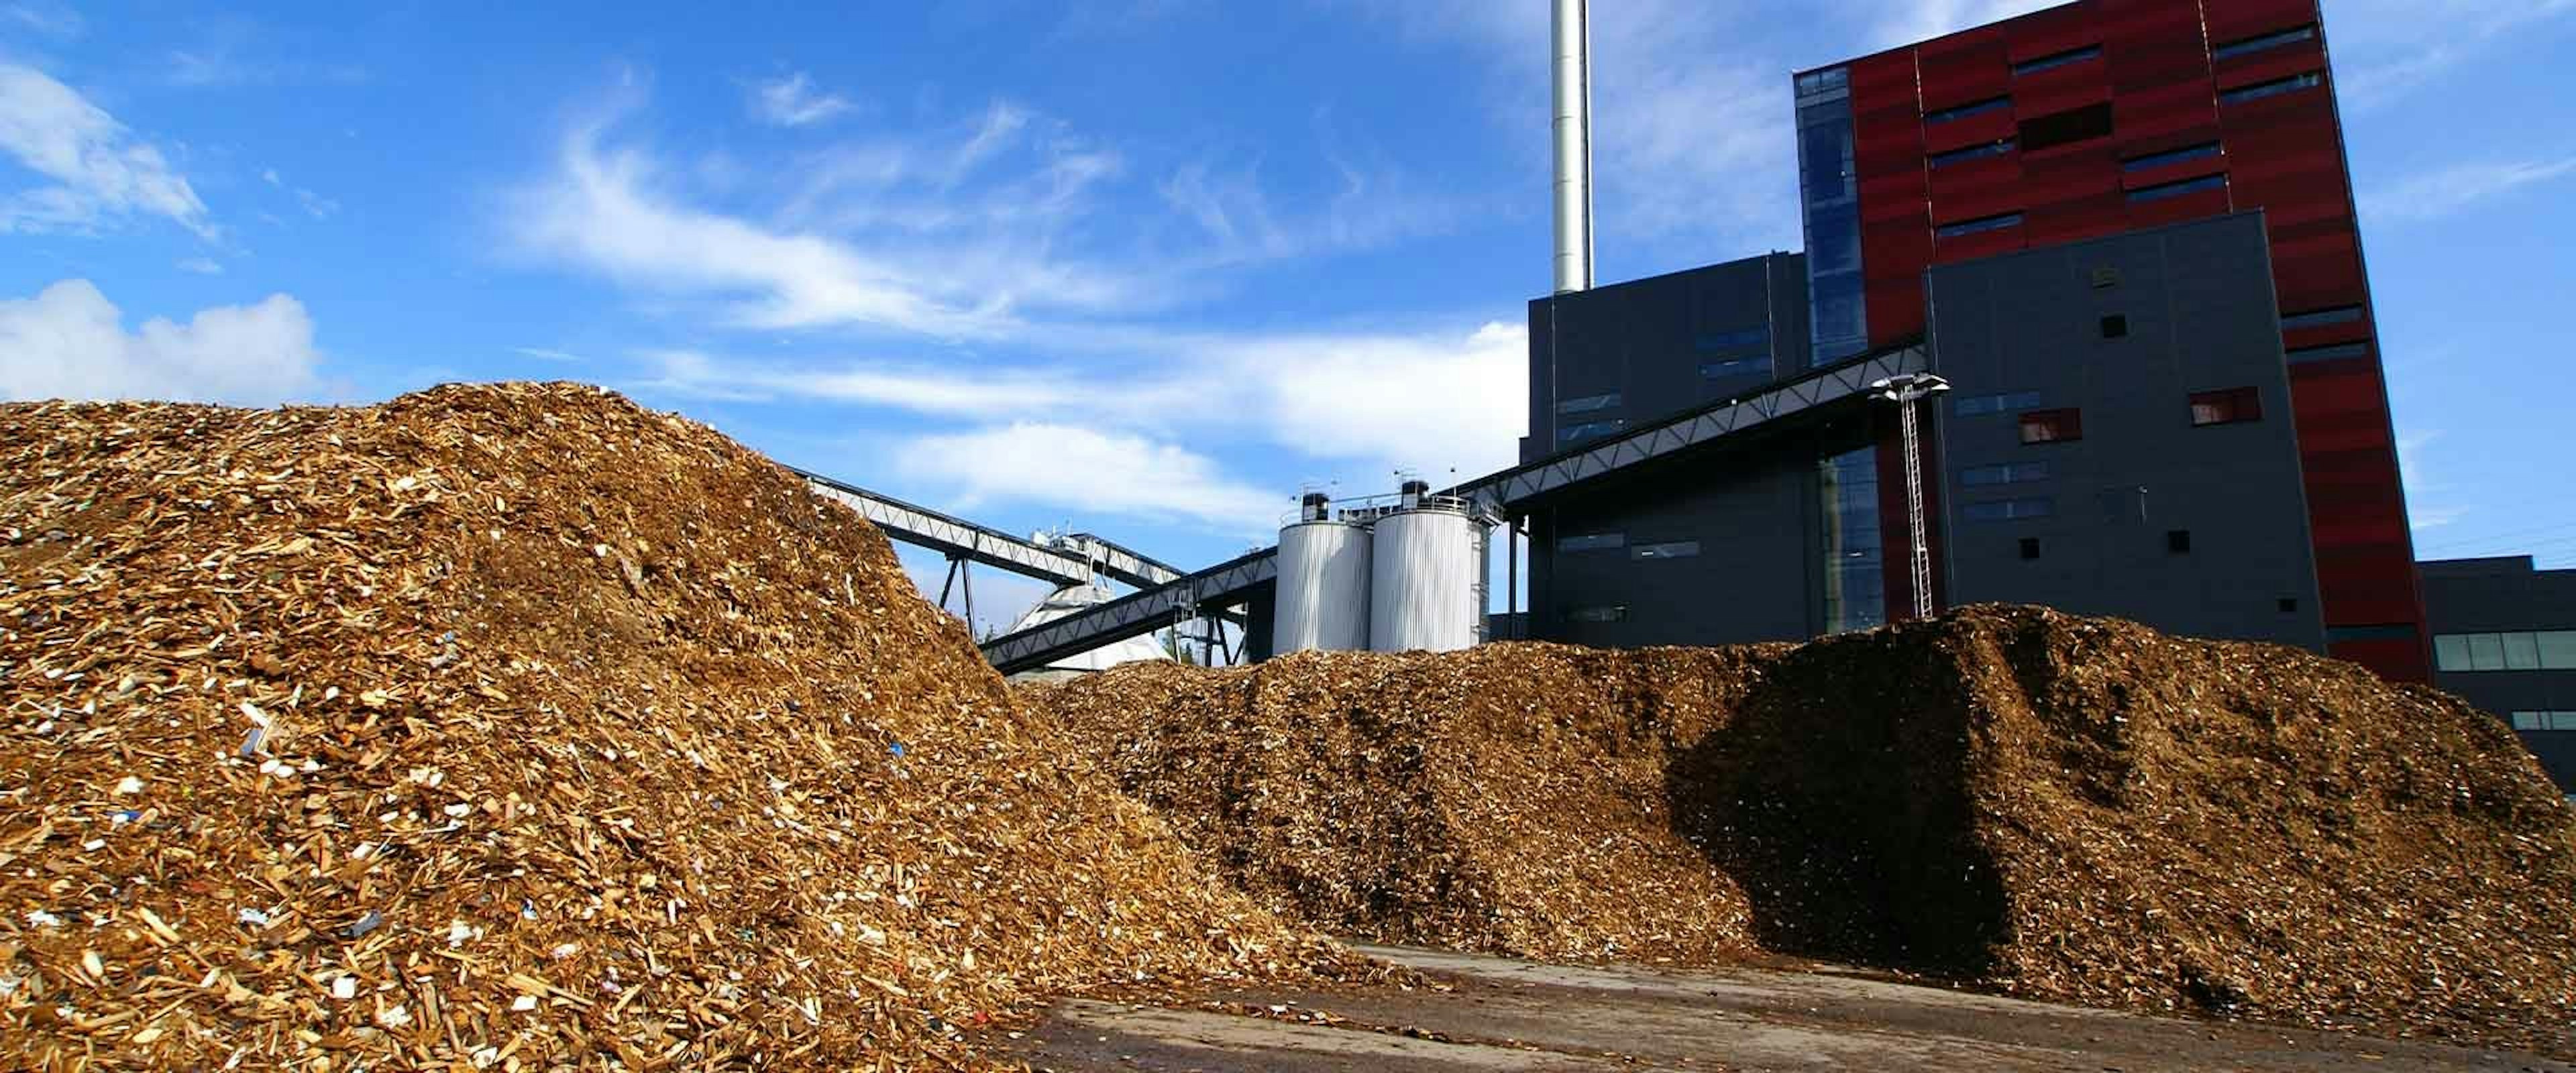 Biomass energy plant with woodchips